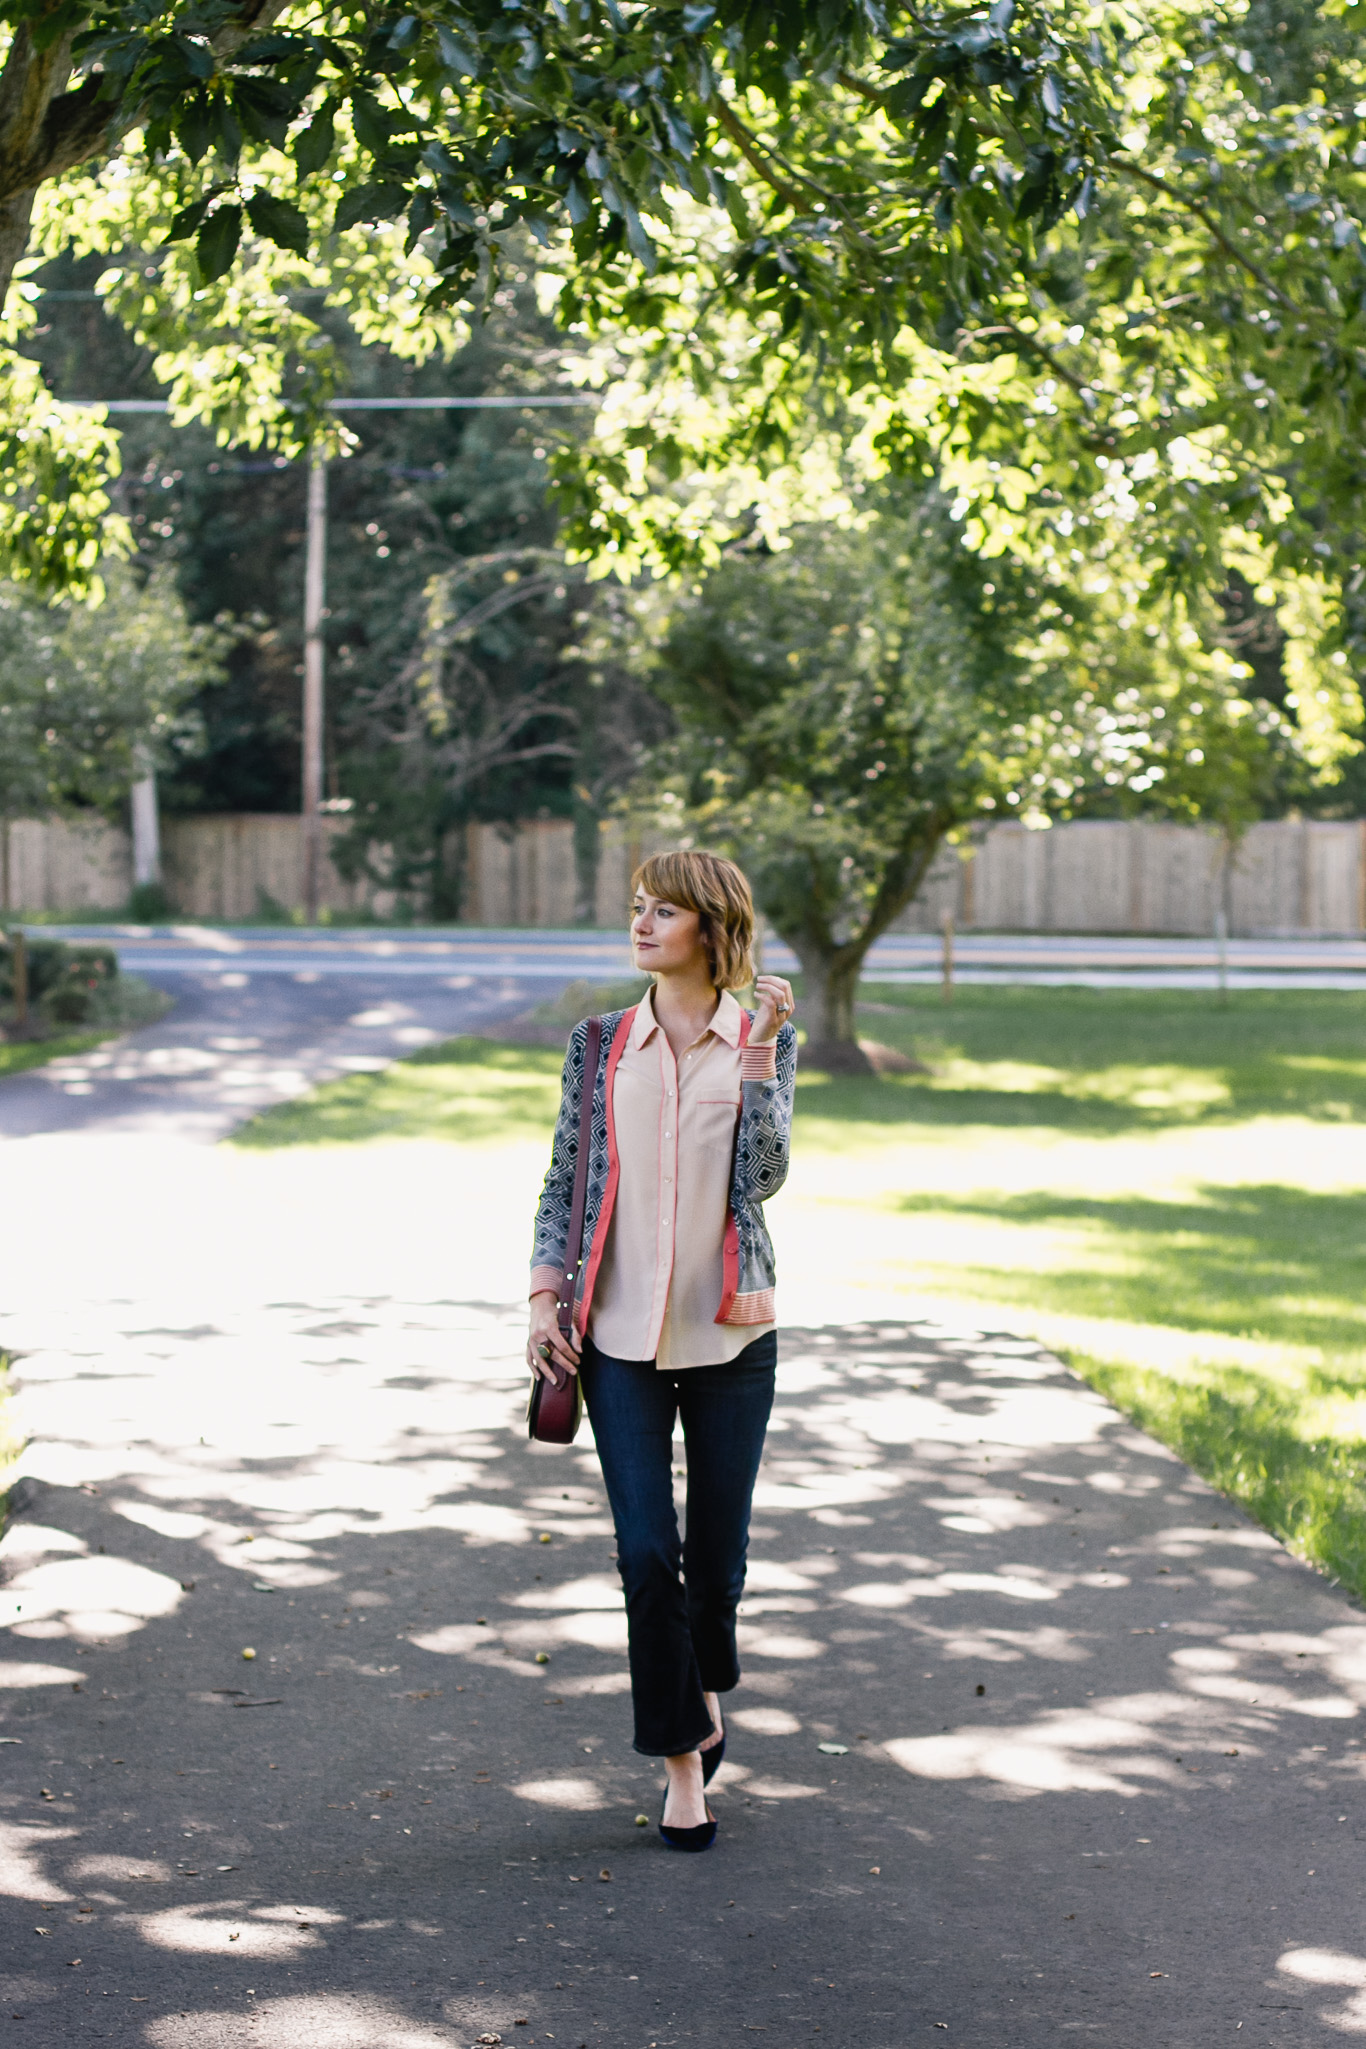 Tory Burch cardigan, Equipment button-down, and Frame jeans